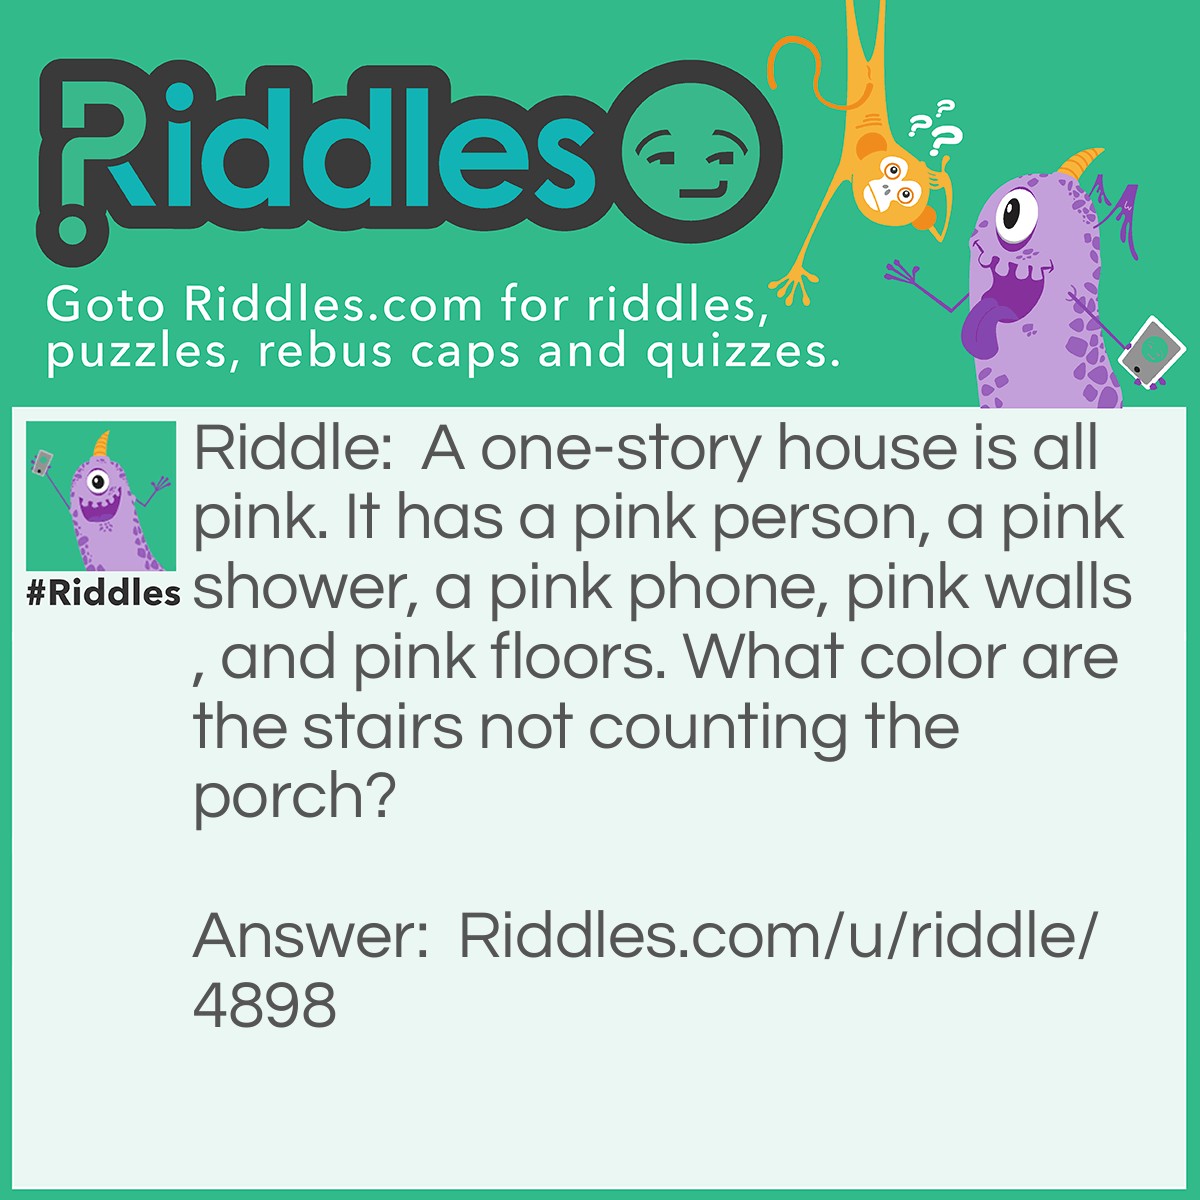 Riddle: A one-story house is all pink. It has a pink person, a pink shower, a pink phone, pink walls, and pink floors. What color are the stairs not counting the porch? Answer: There are now stairs it is a one-story!